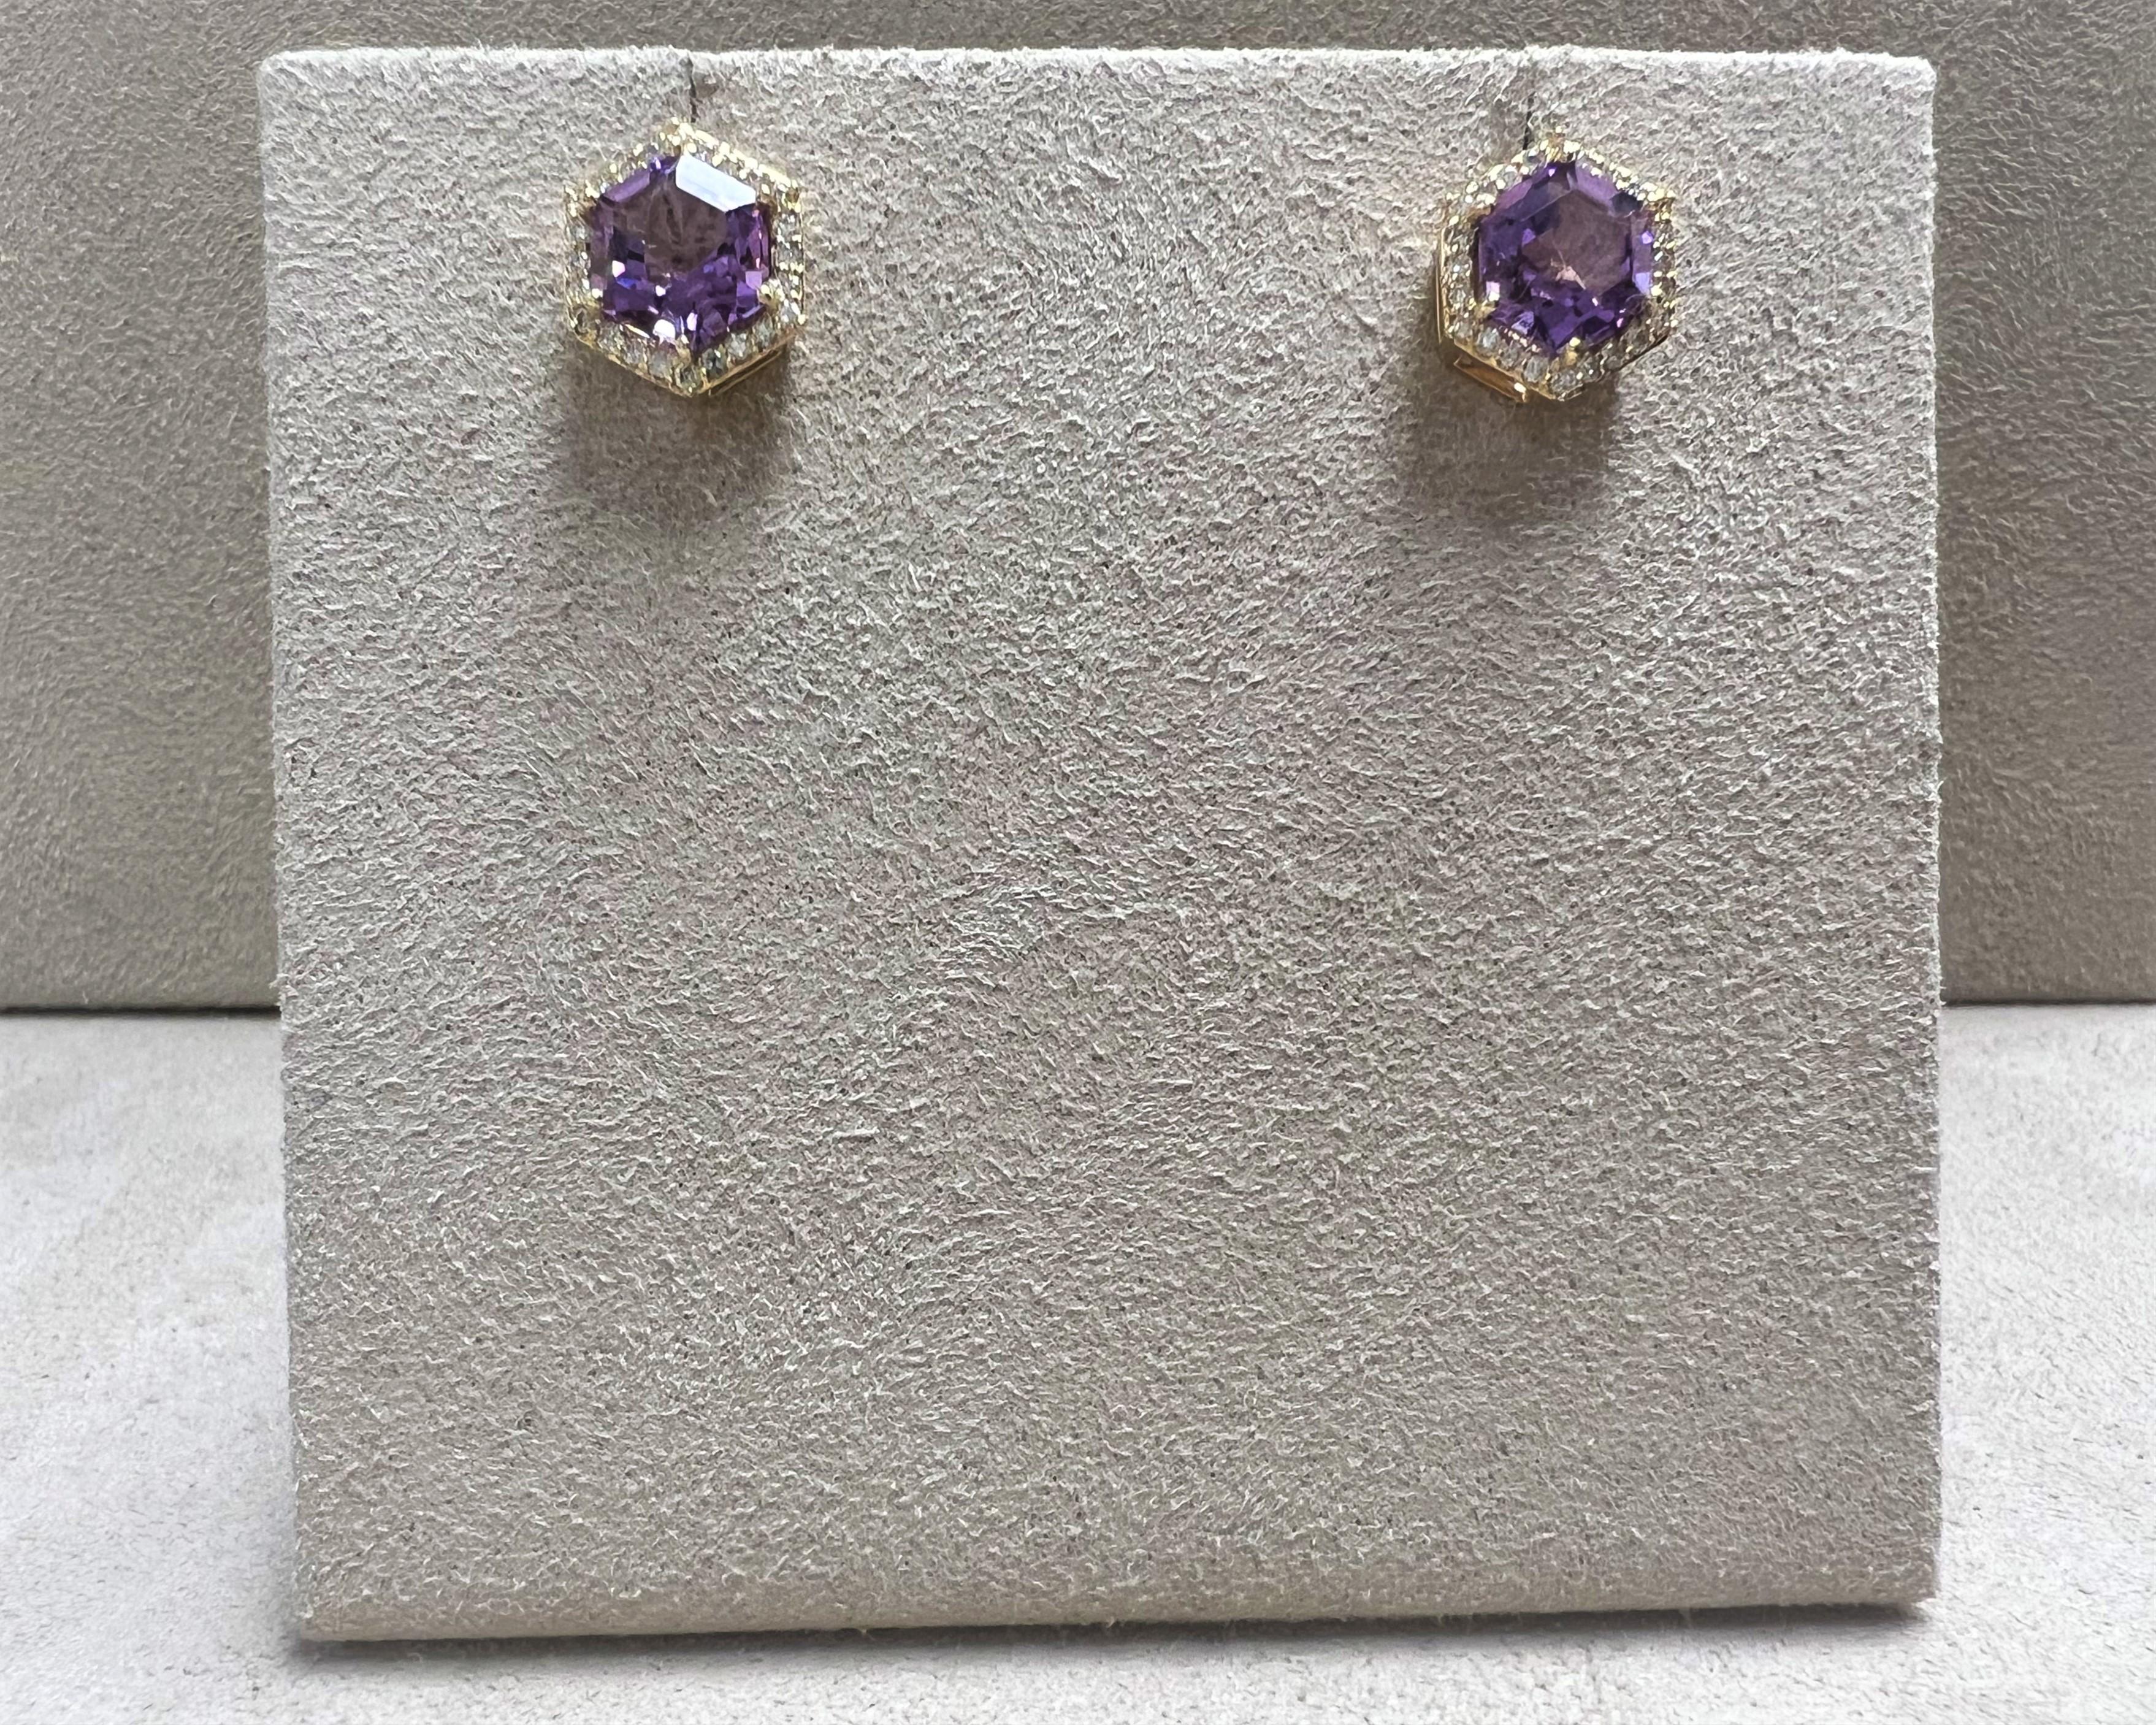 Created in 18 karat yellow gold
Amethyst 2.50 carats approx.
Diamonds 0.20 carat approx.
Post backs for pierced ears
Limited Edition

Sculpted from 18 karat yellow gold, these limited edition earrings feature a royal Amethyst—its estimated 2.5